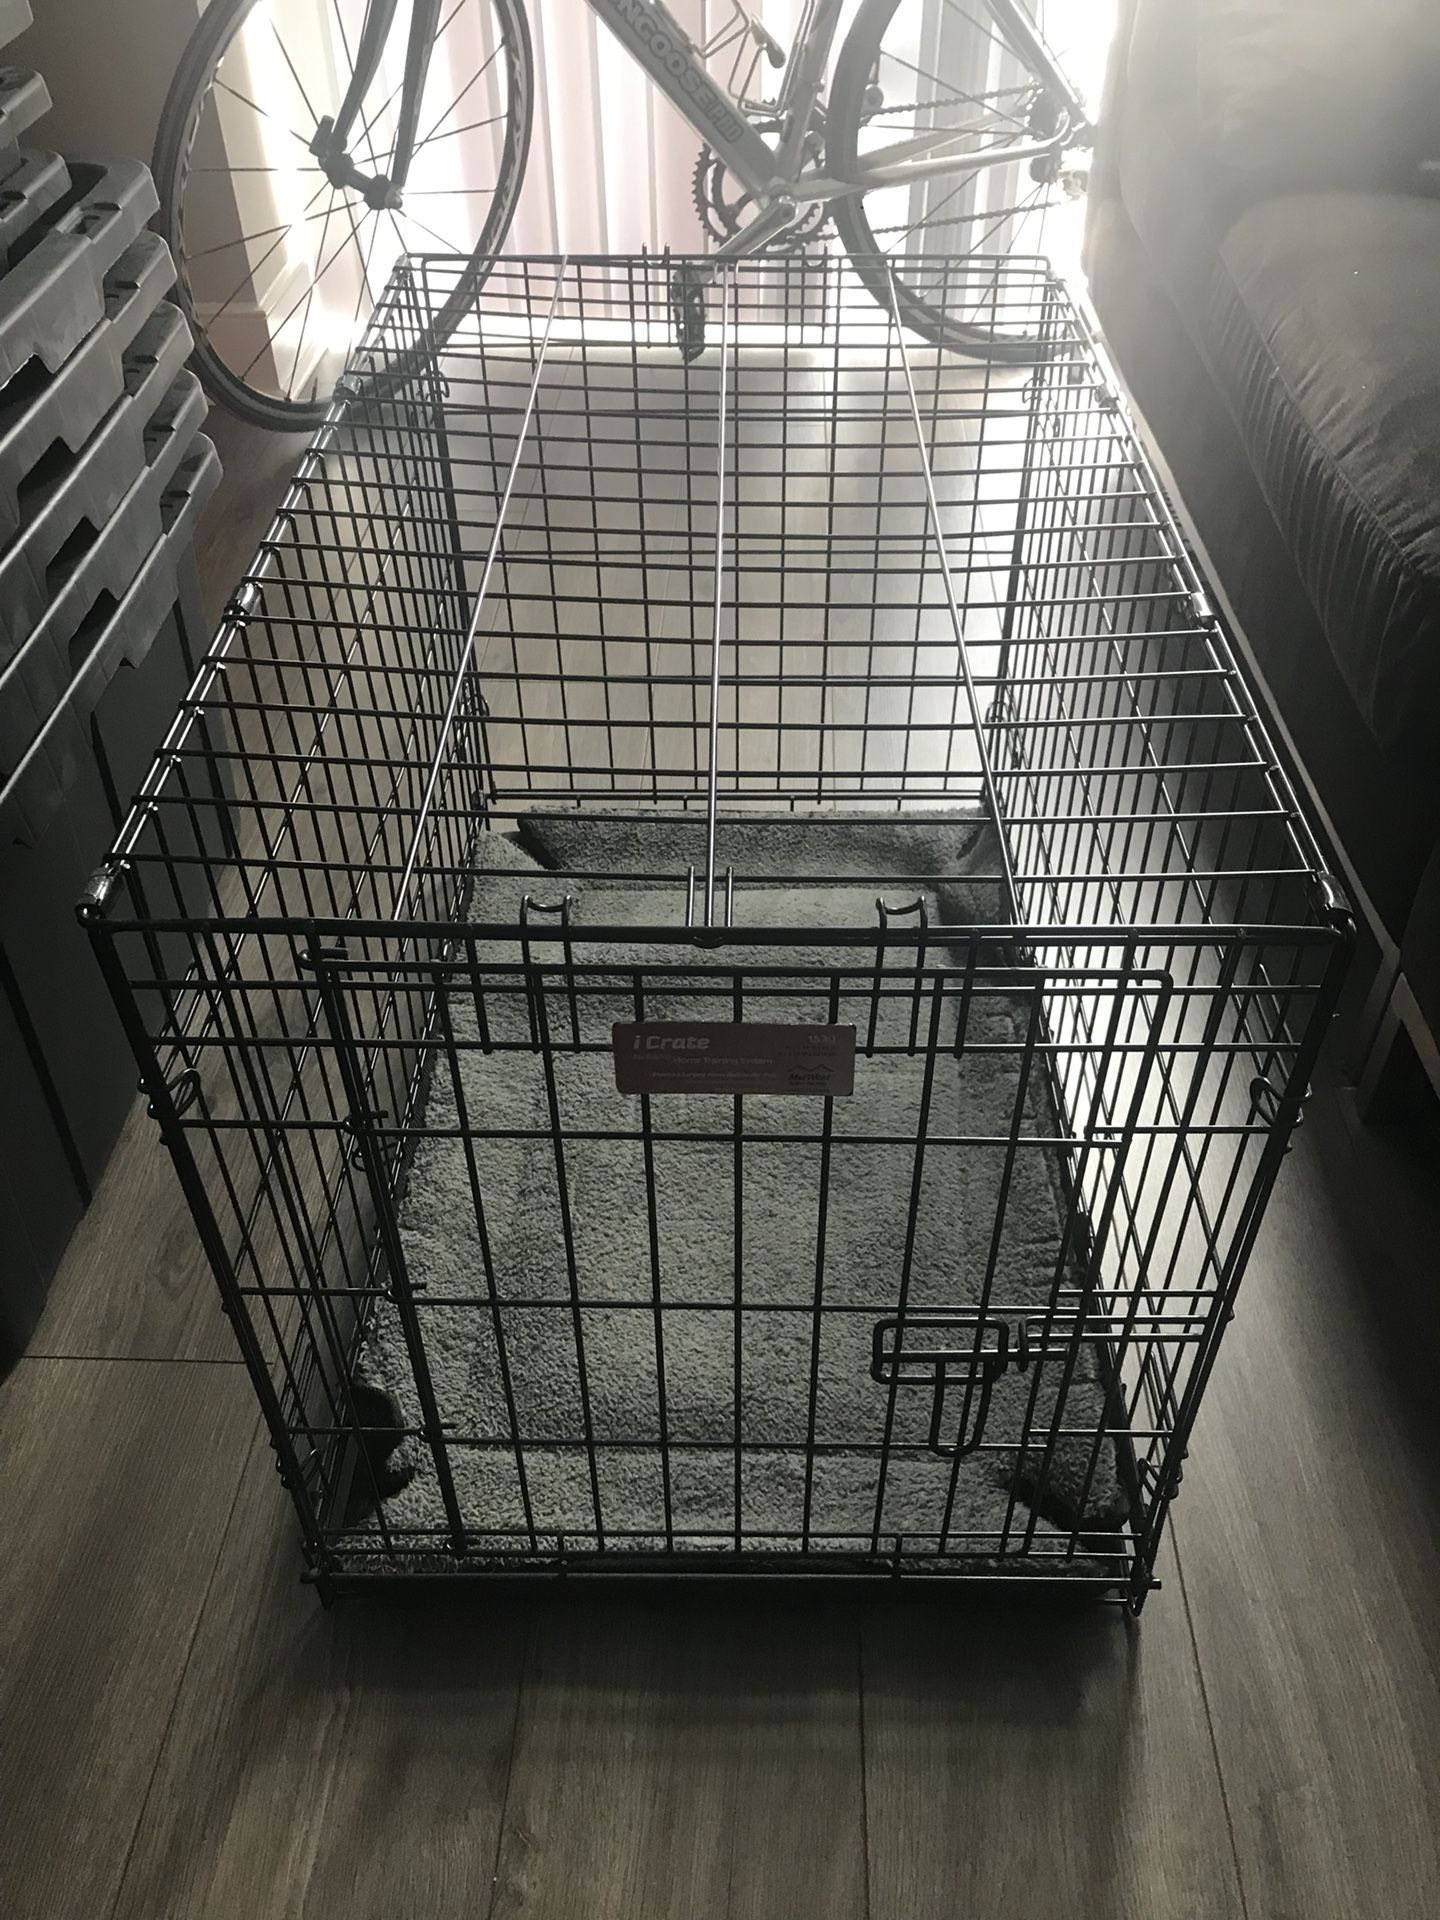 iCrate “Dog Crate” Home Training System